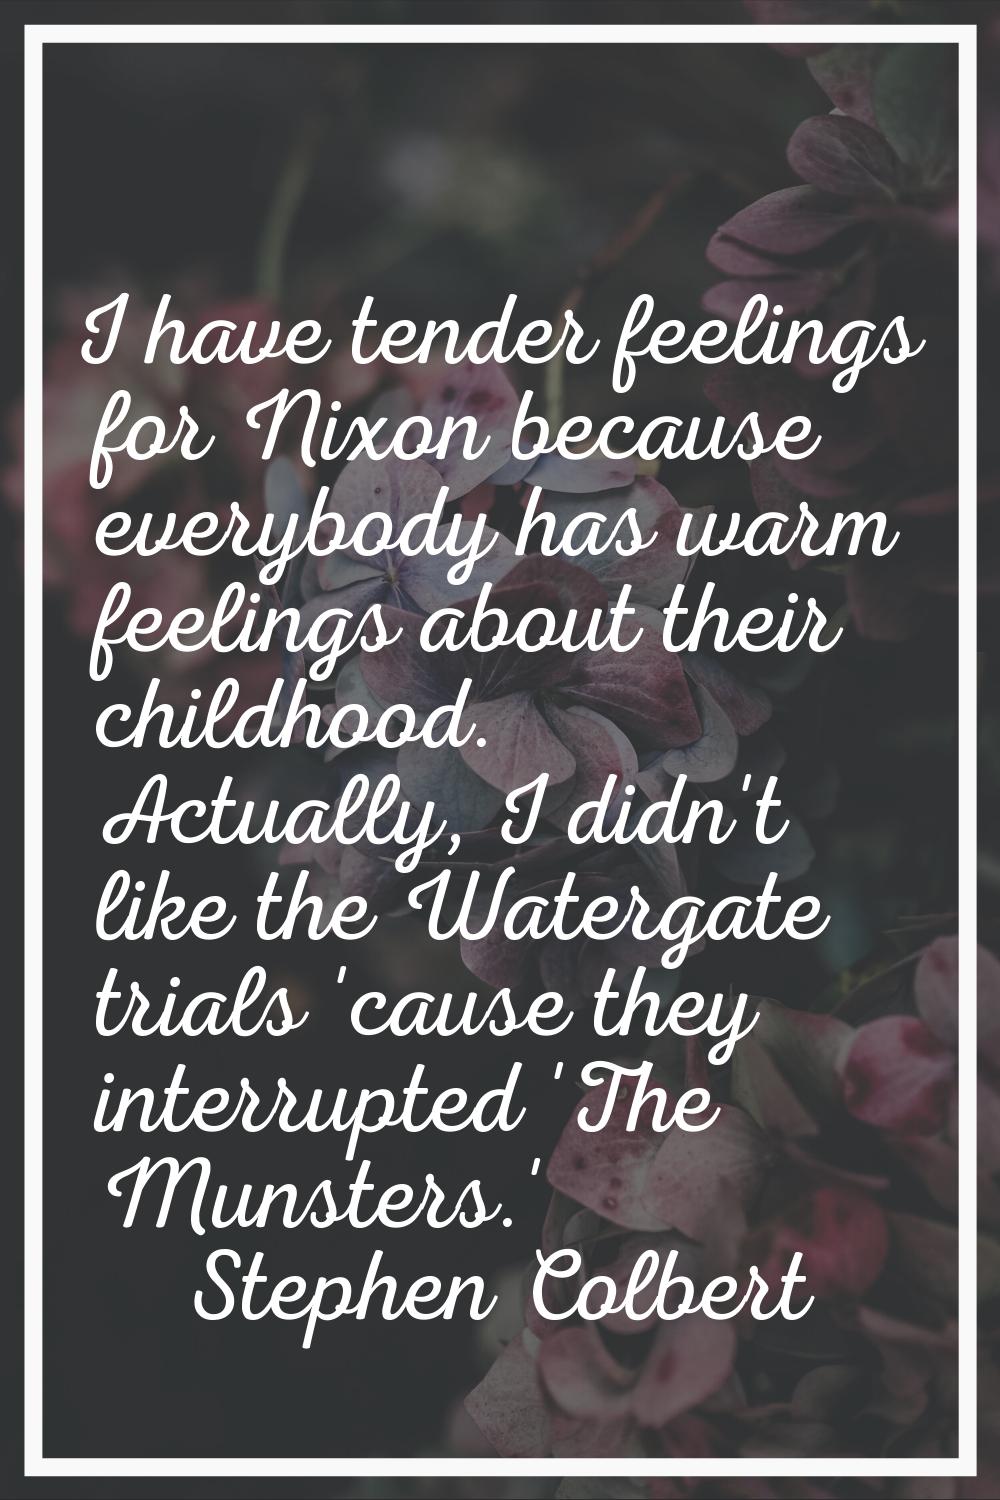 I have tender feelings for Nixon because everybody has warm feelings about their childhood. Actuall